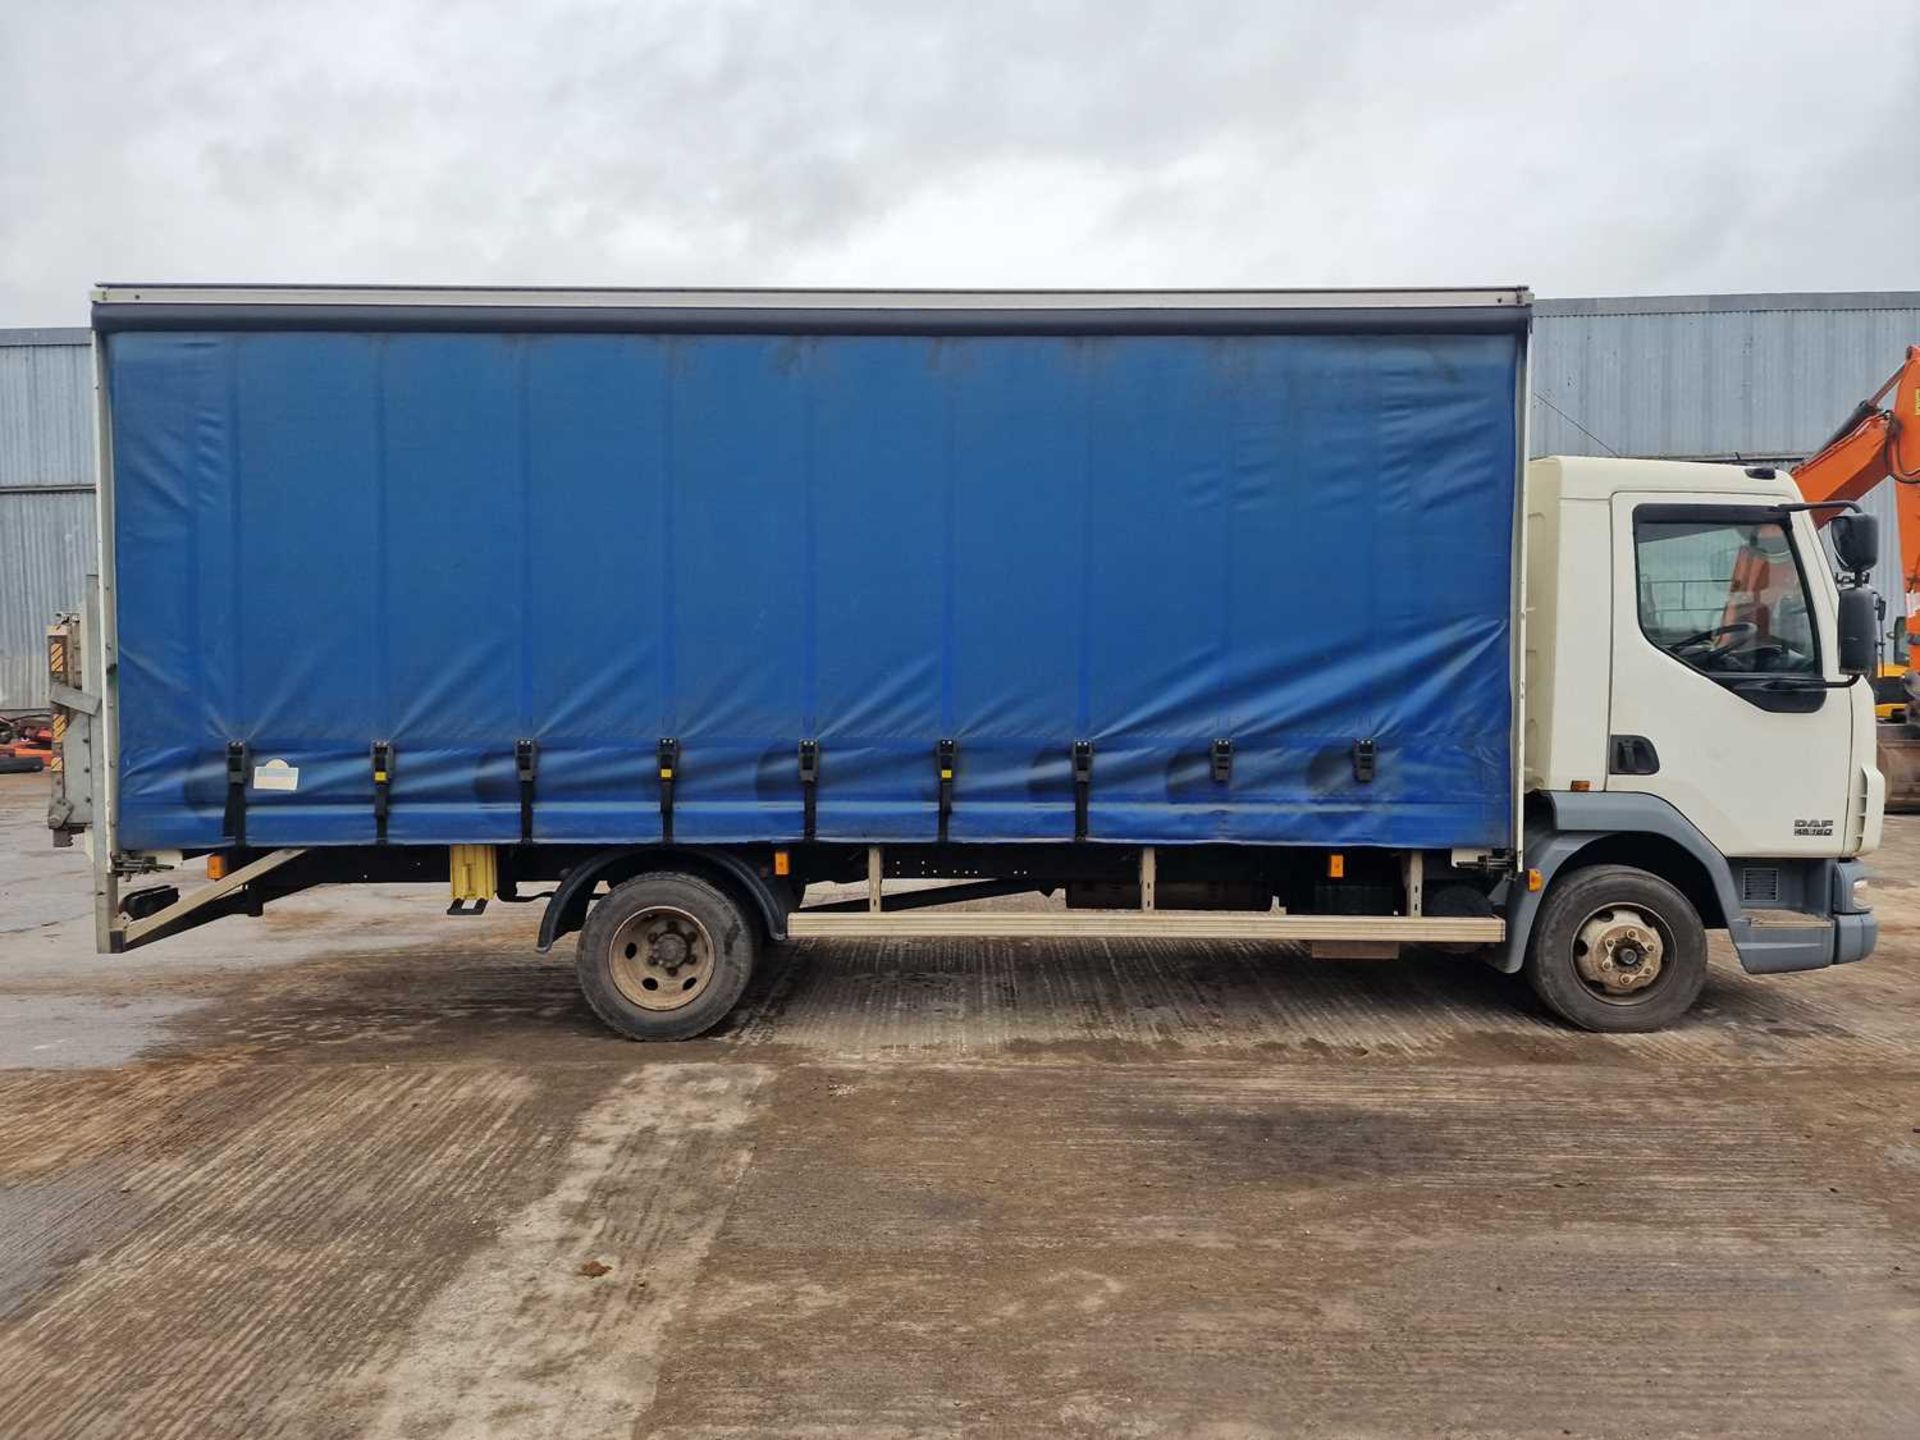 2006 DAF LF45.160 4x2 Curtainsider Lorry, Tailgate, Manual Gear Box (Reg. Docs. Available) - Image 6 of 40